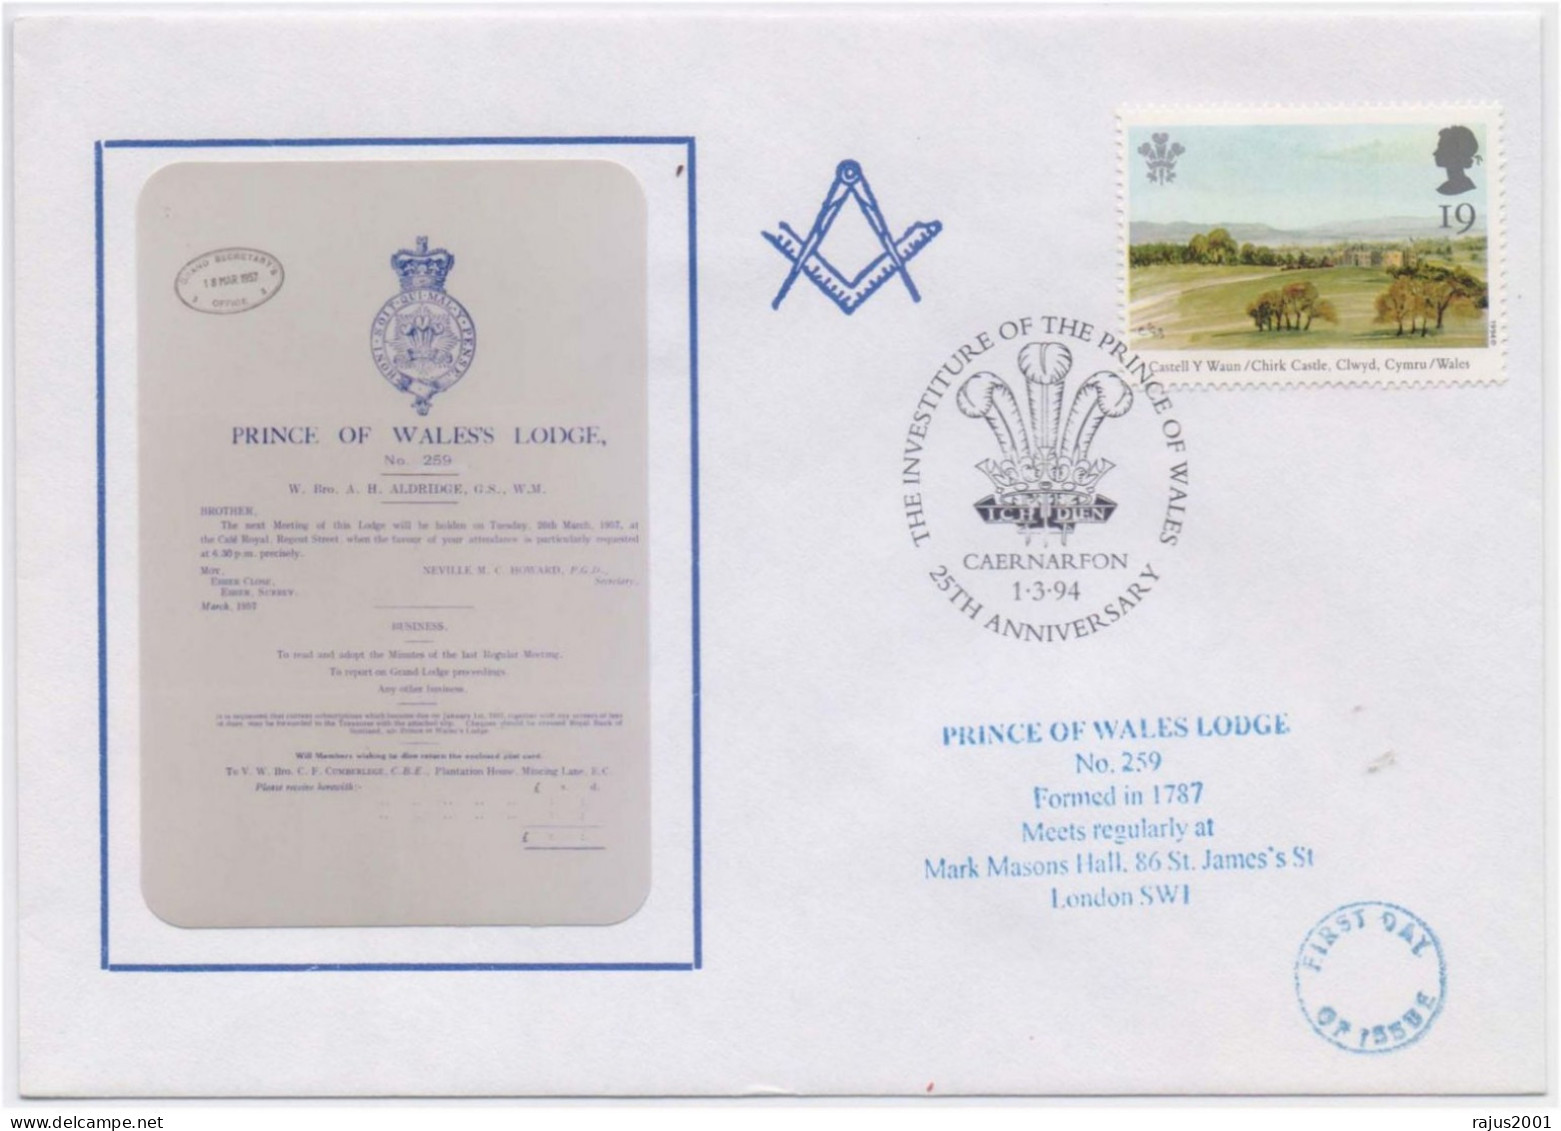 PRINCE OF WALES LODGE NO 259, FORMED IN 1787, Freemasonry Masonic Limited Only 75 Cover Issued Great Britain Cover - Freimaurerei